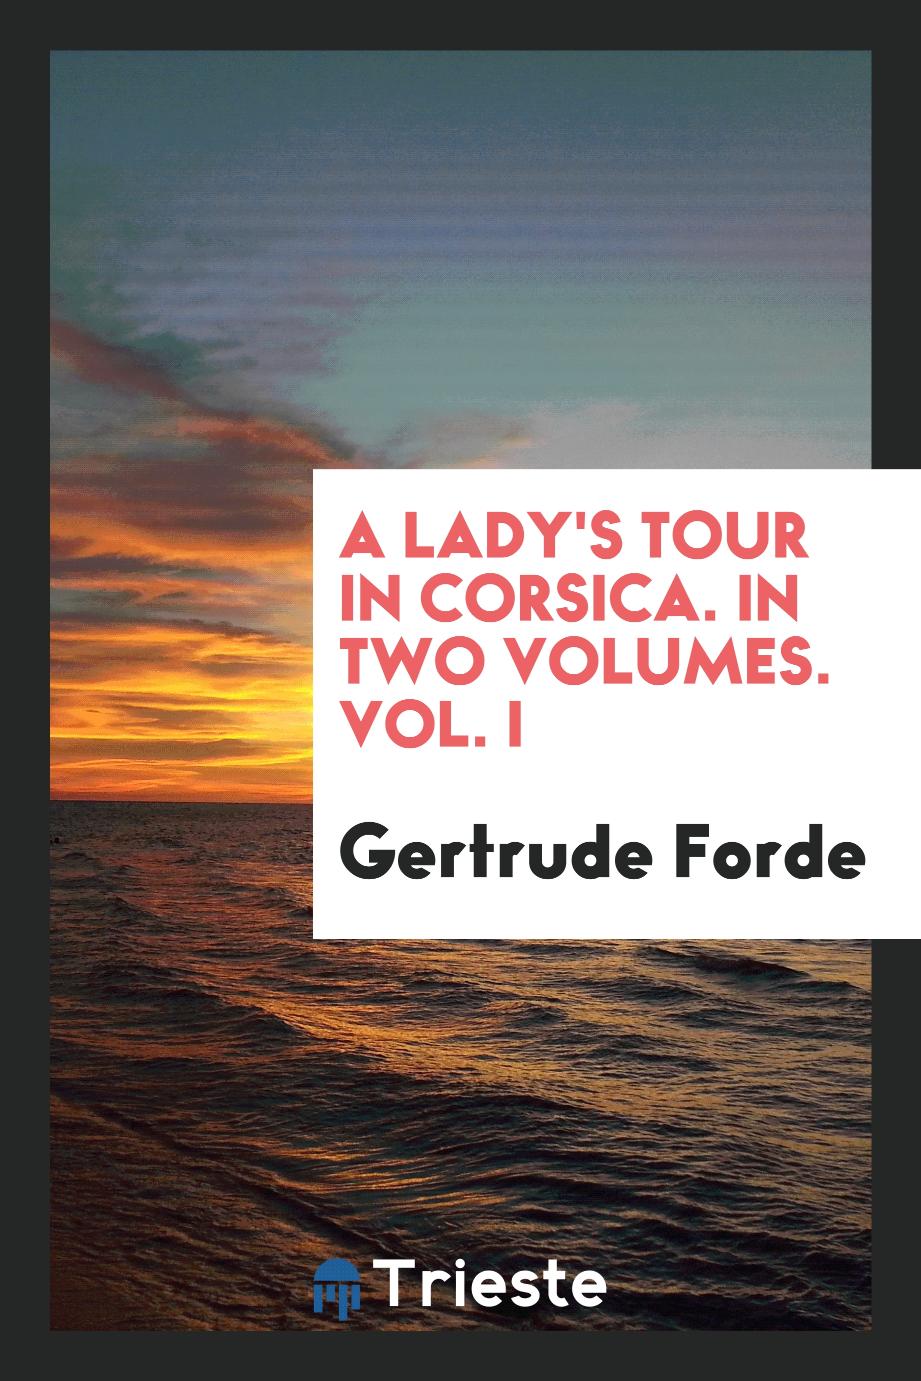 A Lady's Tour in Corsica. In Two Volumes. Vol. I